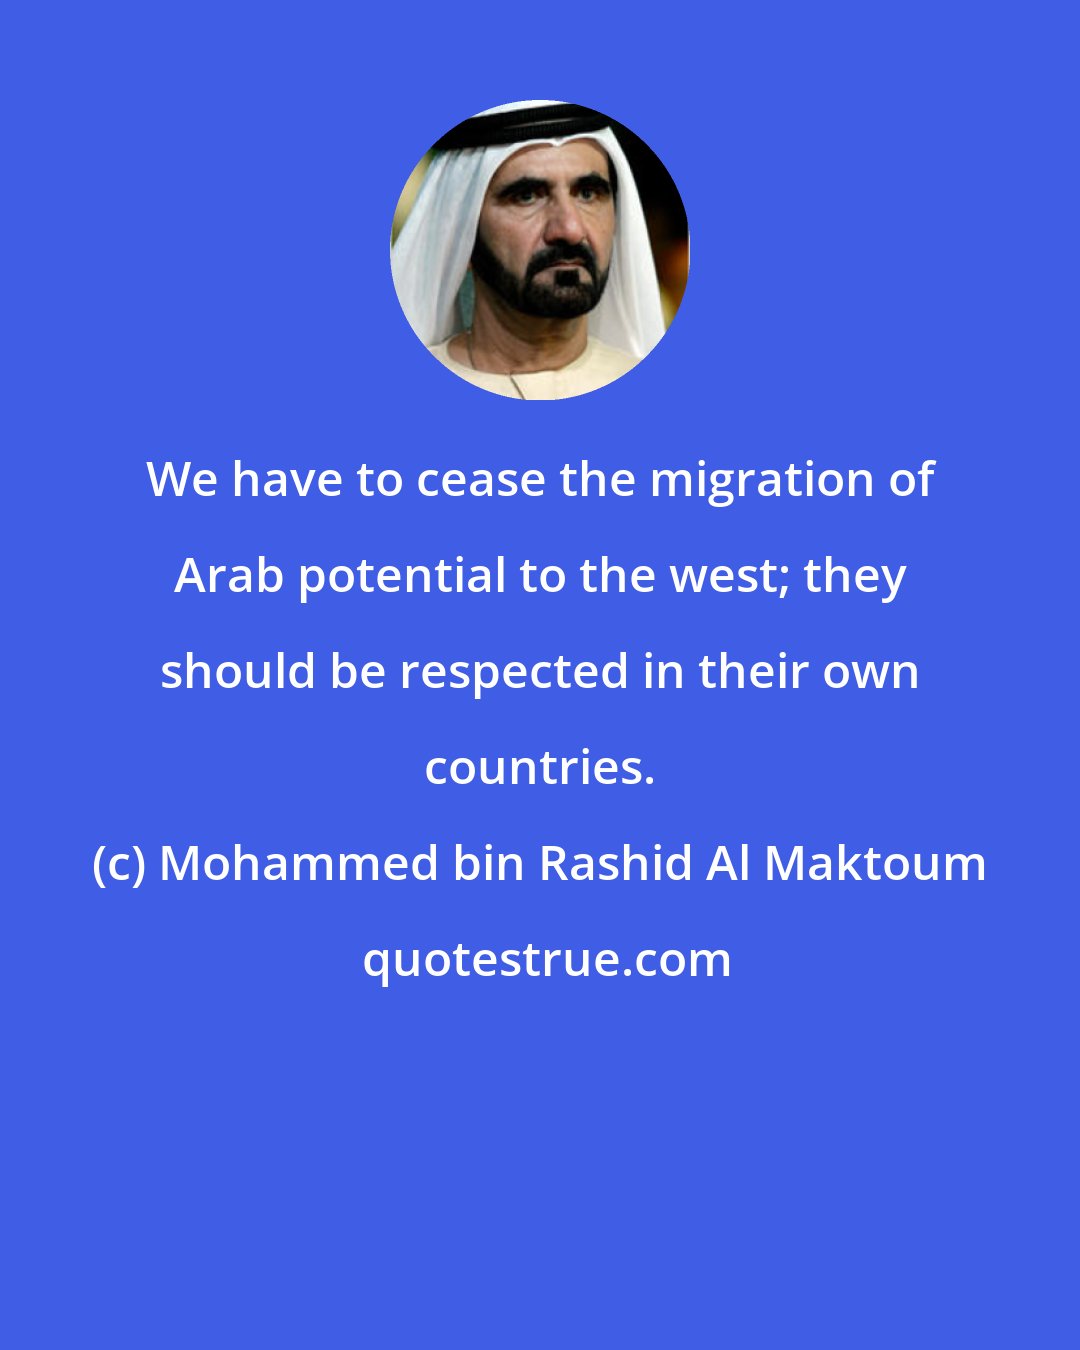 Mohammed bin Rashid Al Maktoum: We have to cease the migration of Arab potential to the west; they should be respected in their own countries.